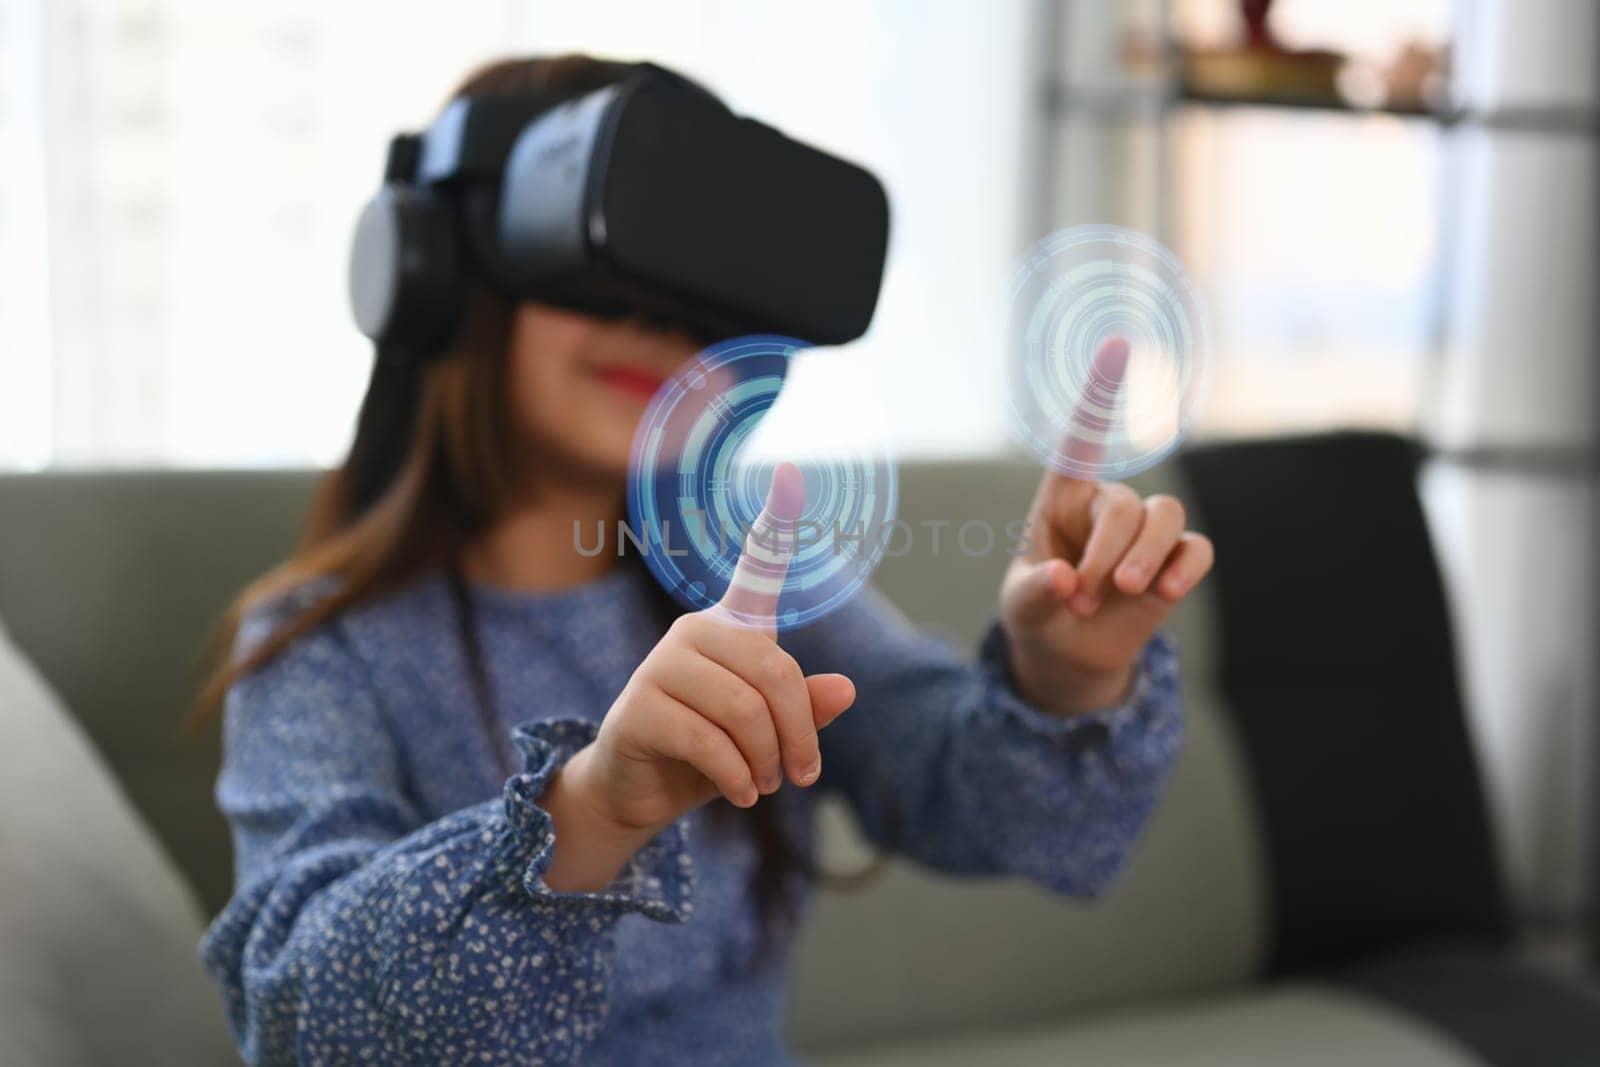 Little girl wearing VR headset and touching virtual button interacting with digital interface by prathanchorruangsak